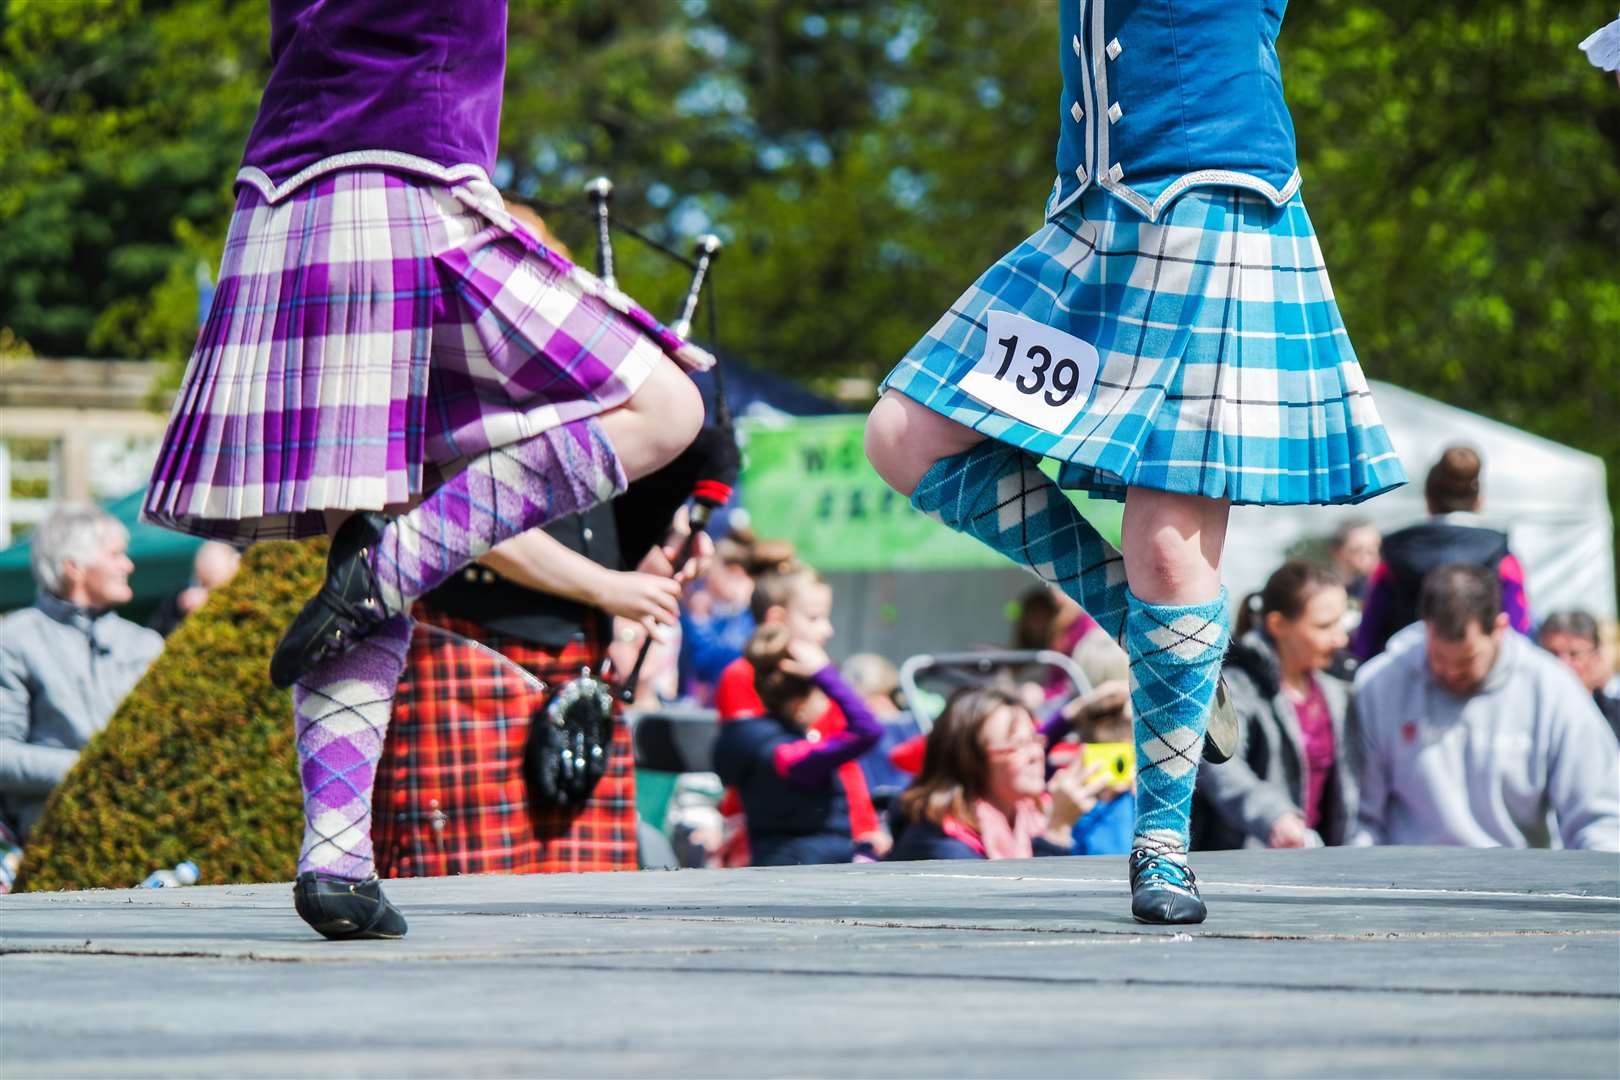 Assynt Highland Games traditionally takes place on the second Friday in August but had to be cancelled this year,